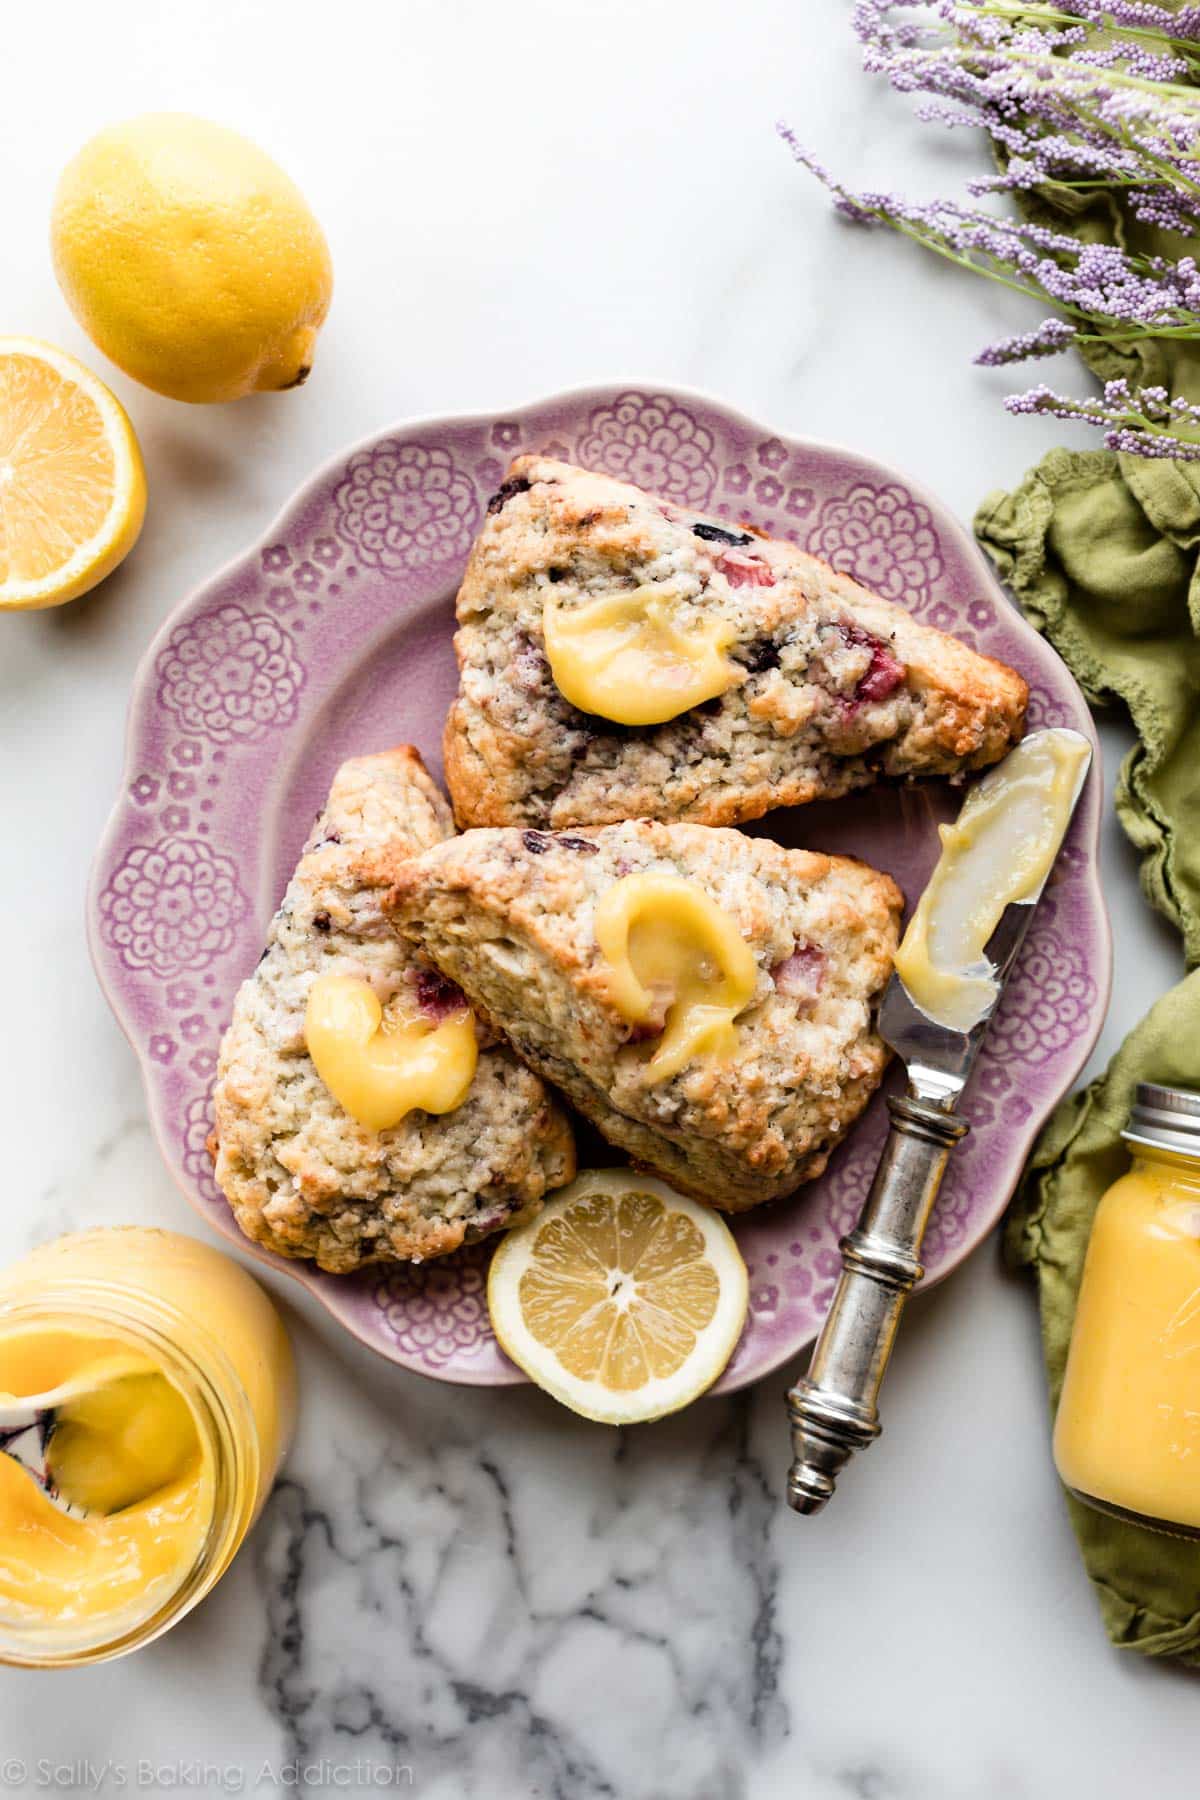 Lemon curd on mixed berry scones on a pink plate